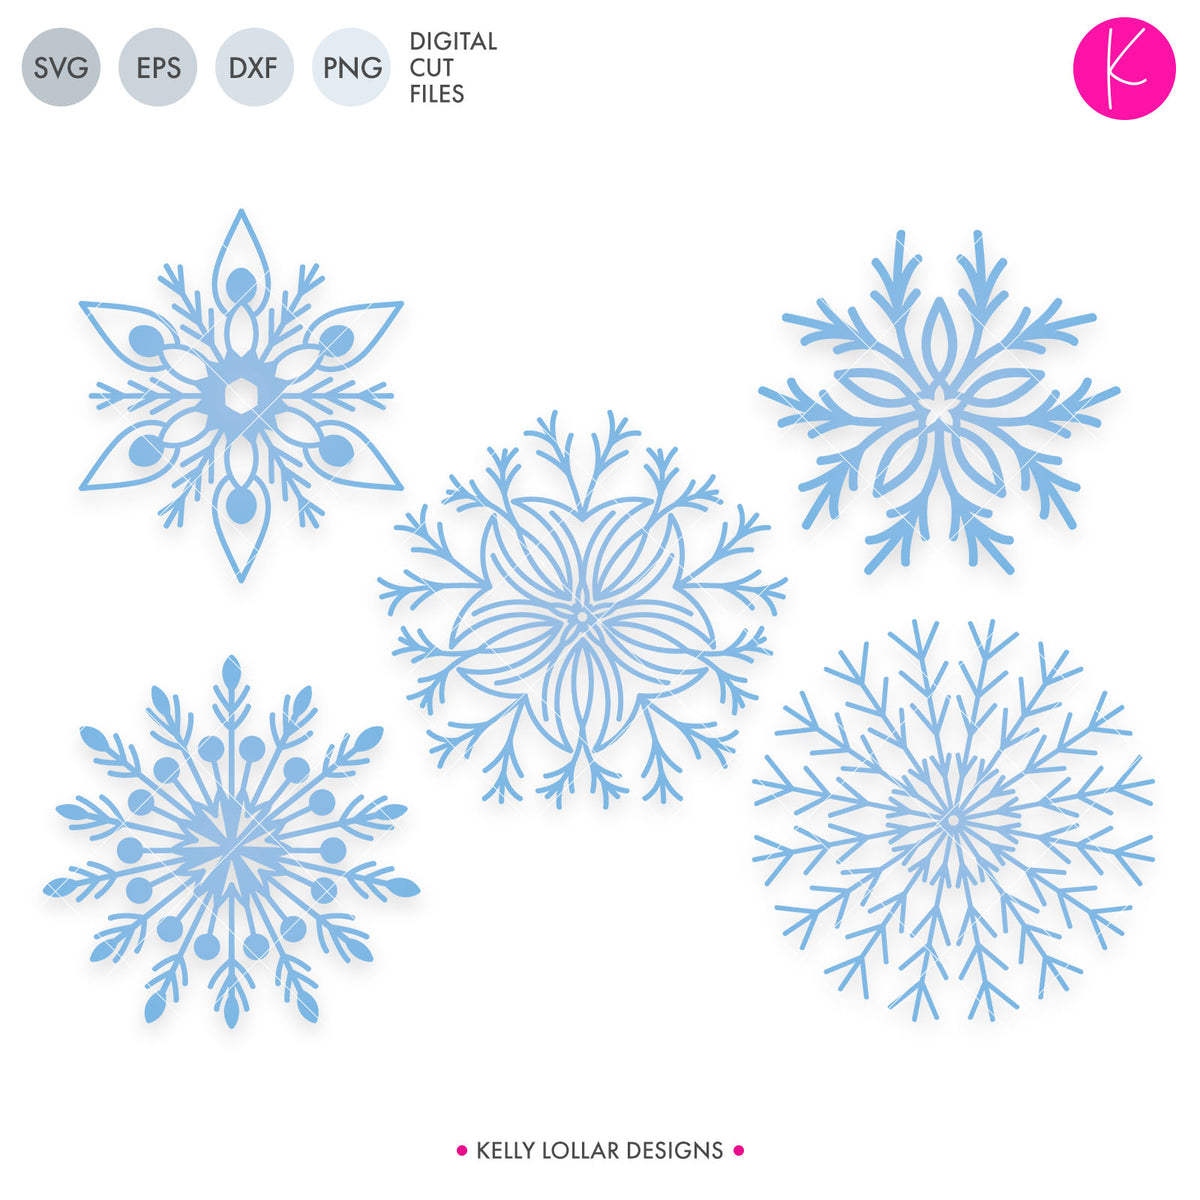 Snowflake Pack | SVG DXF EPS PNG Cut Files